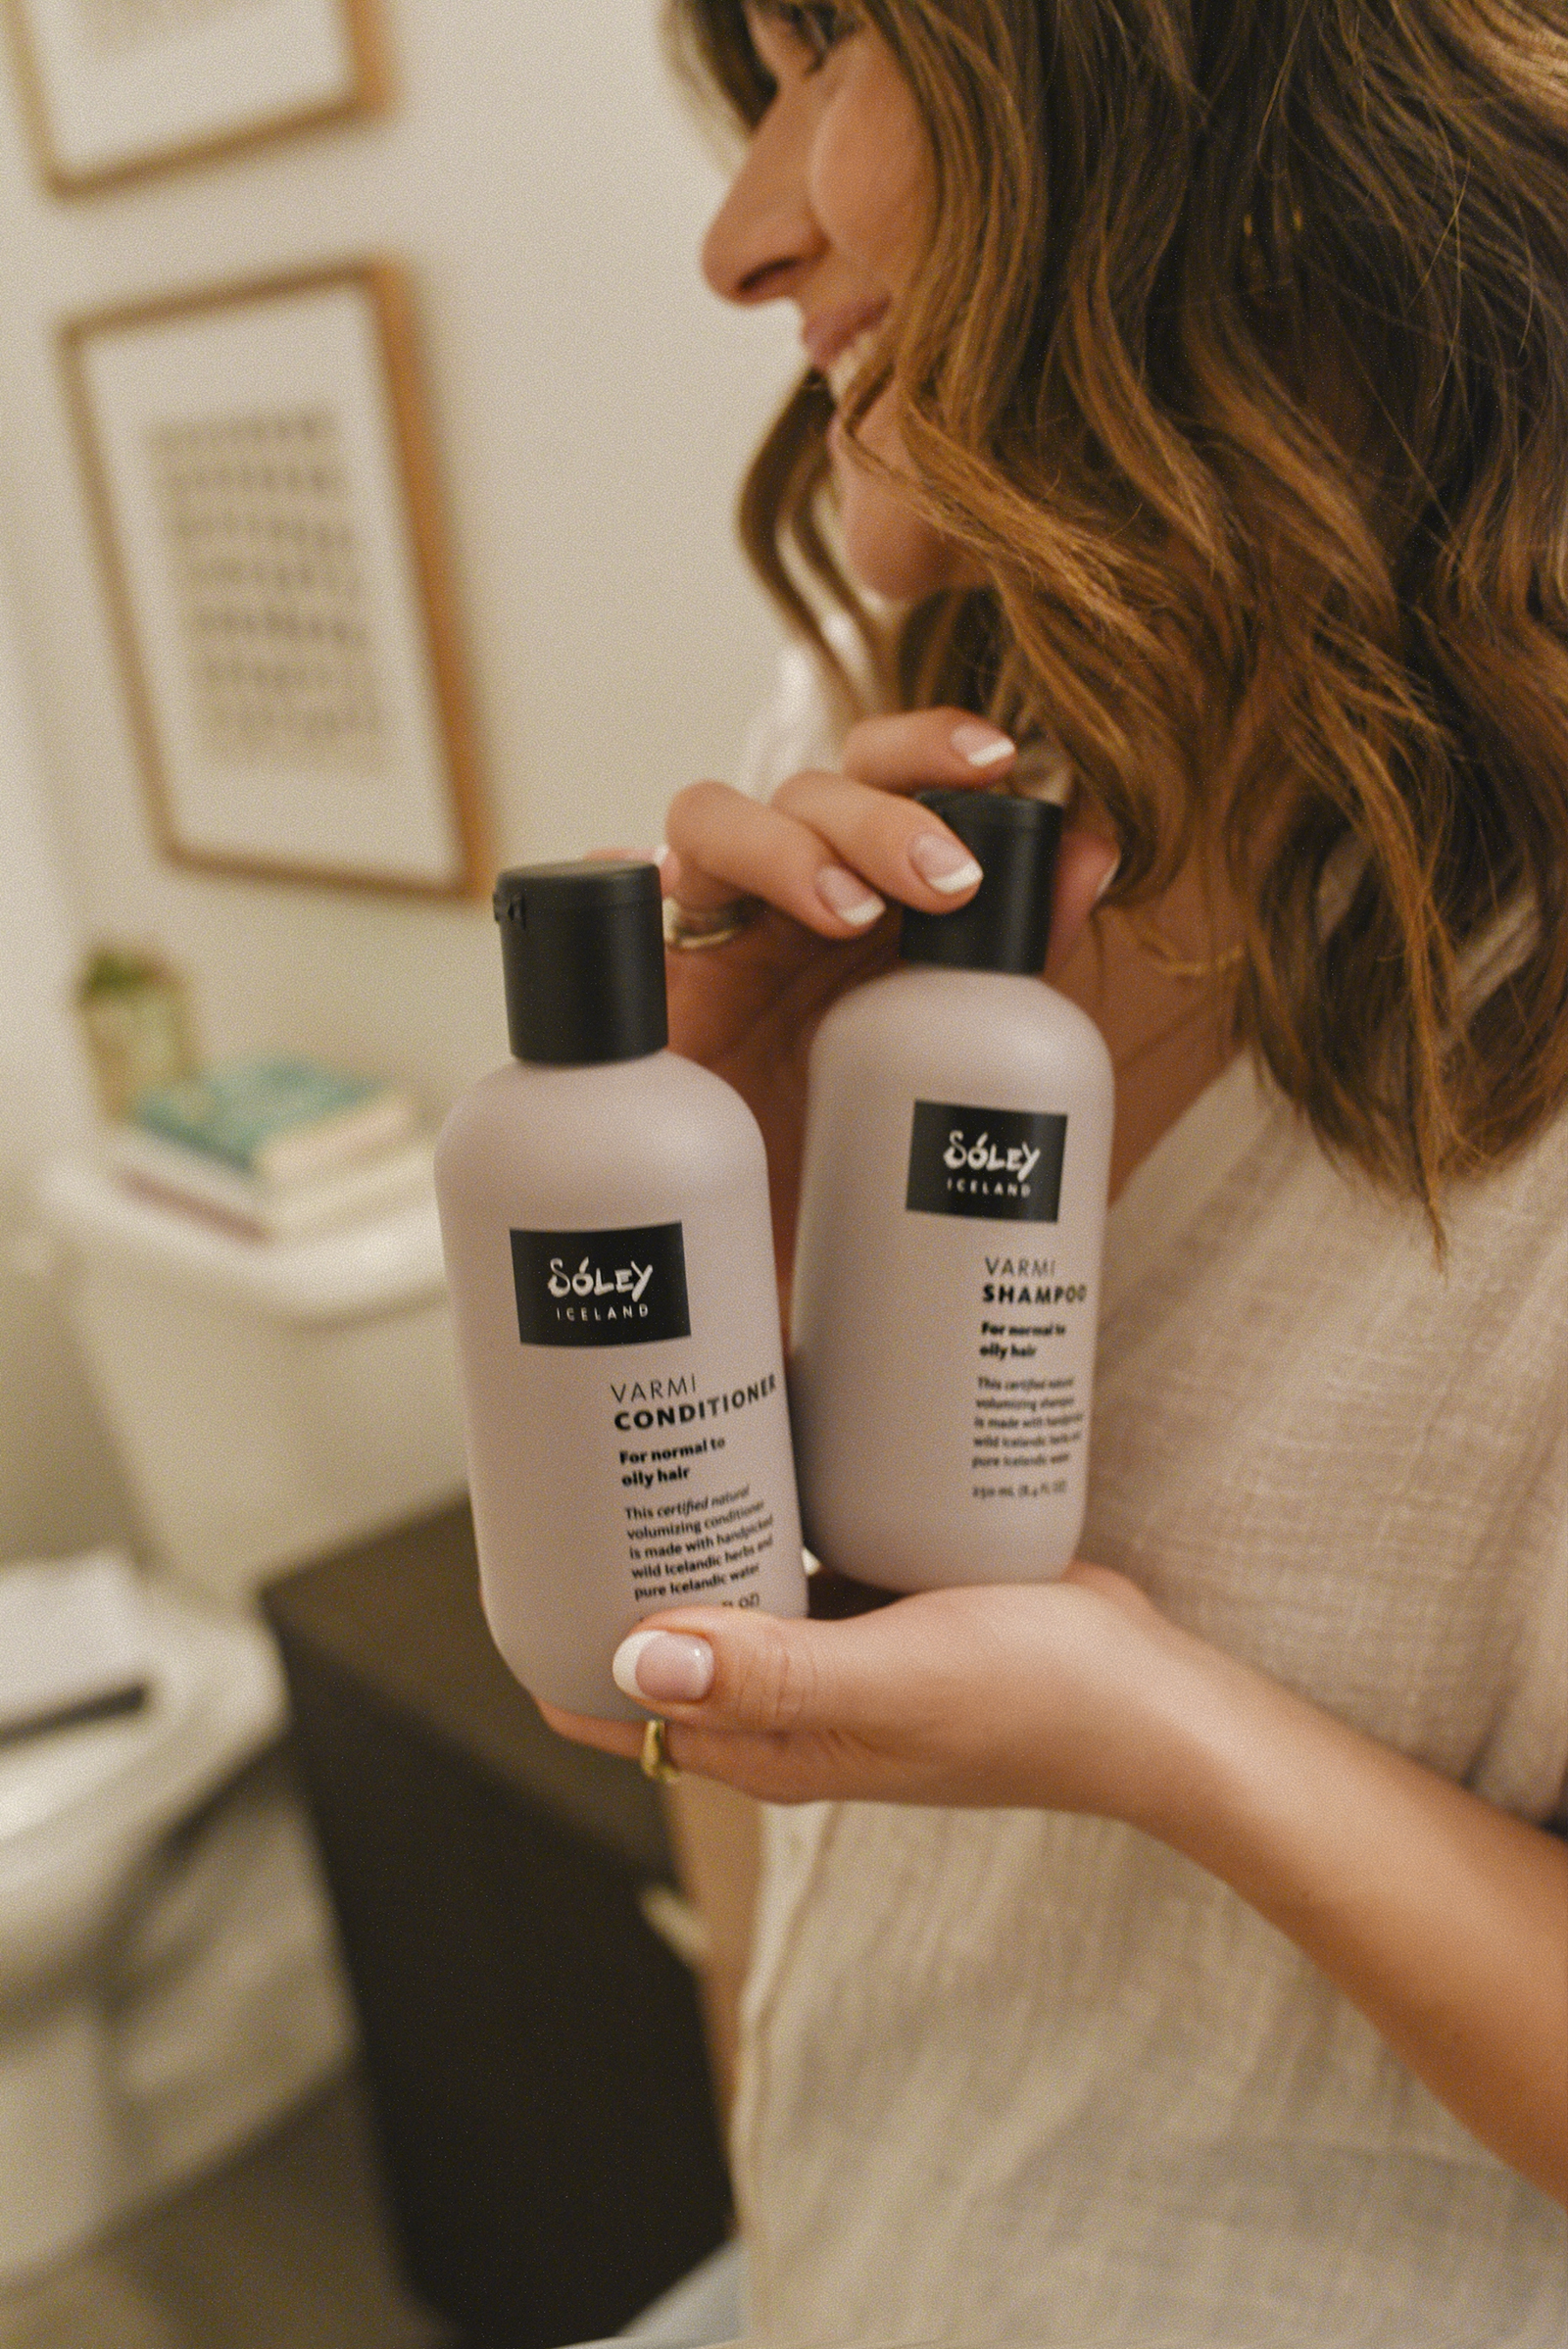 Carolina Hellal of Chic Talk trying Sóley Iceland Varmi shampoo and conditioner for the first time. 